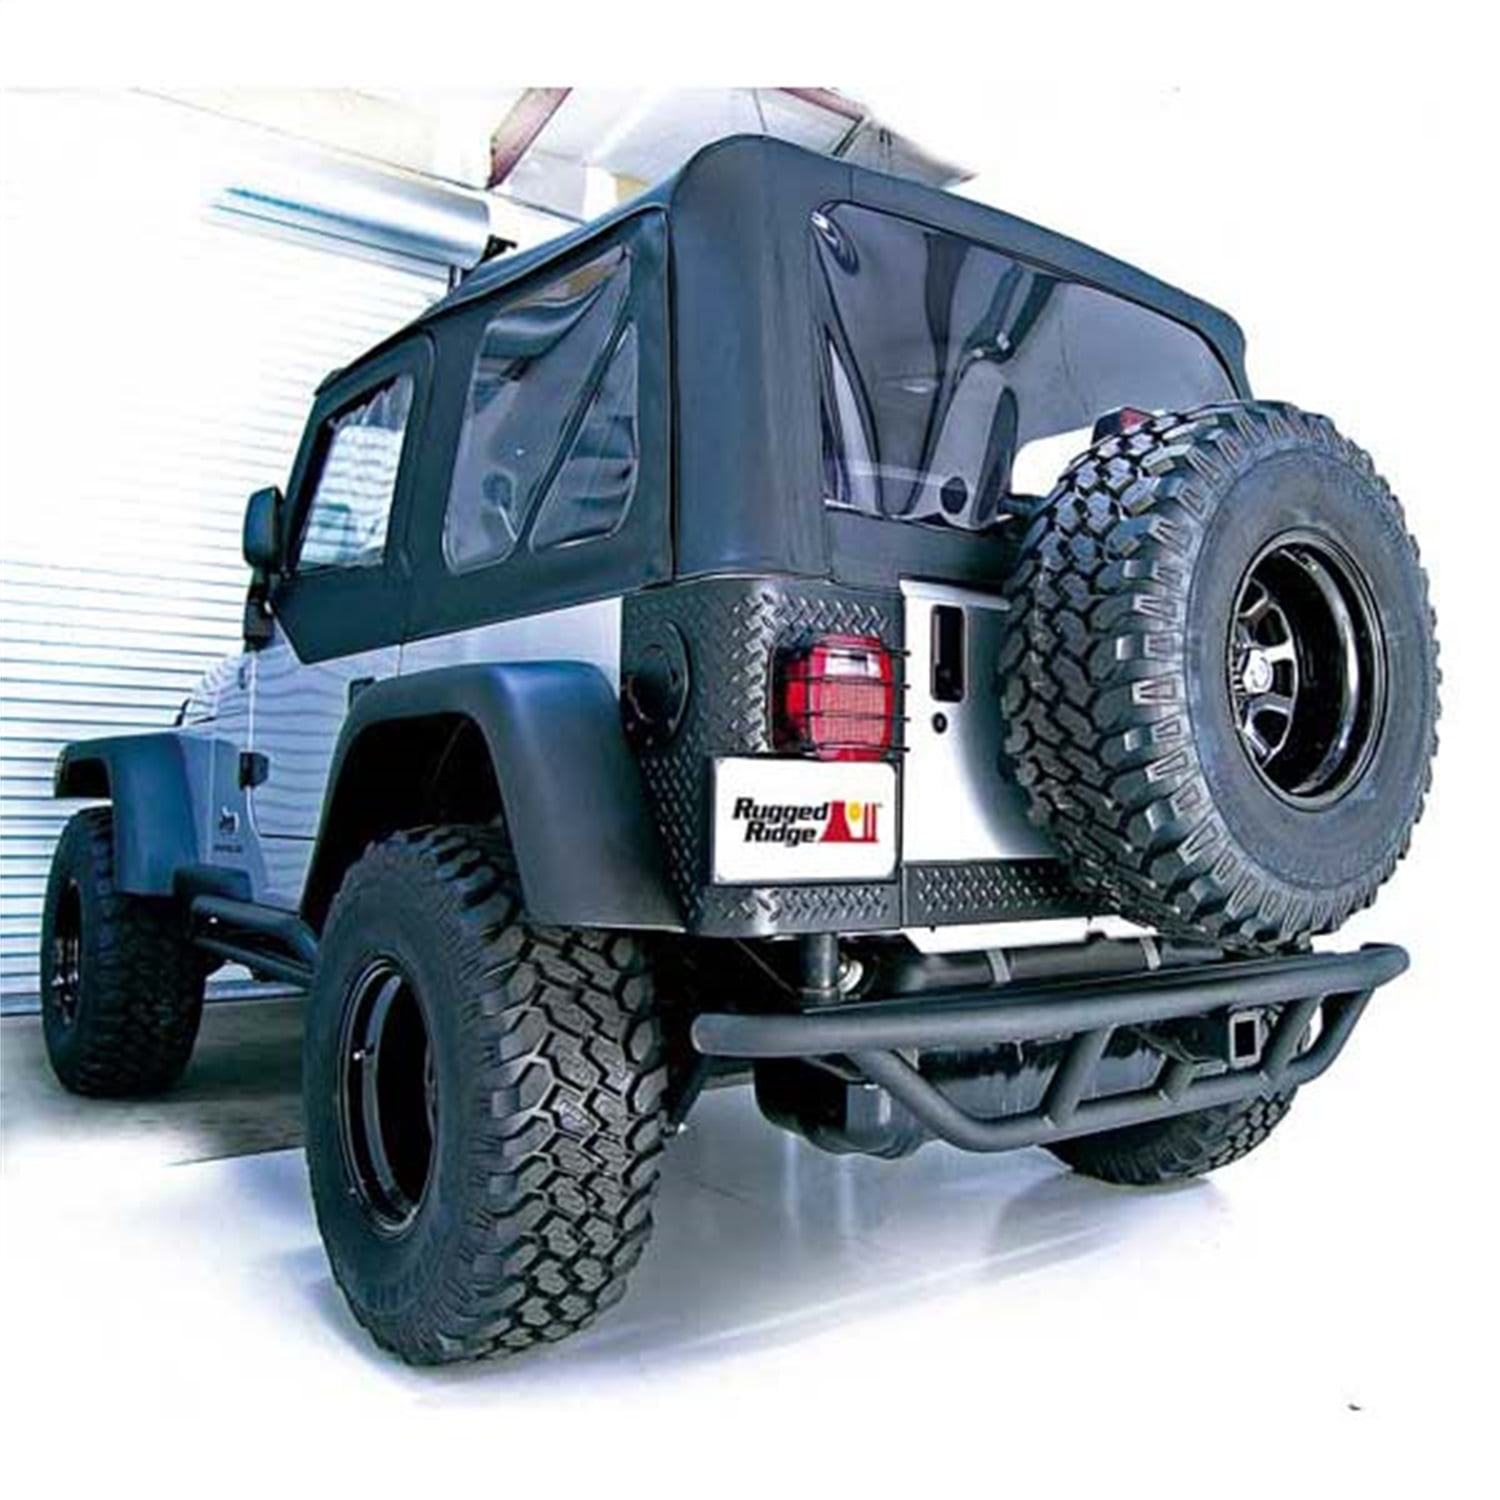 Heavy Duty; 87-06 for Jeep Wrangler YJ/TJ Rugged Ridge Spare Tire Carrier Mount